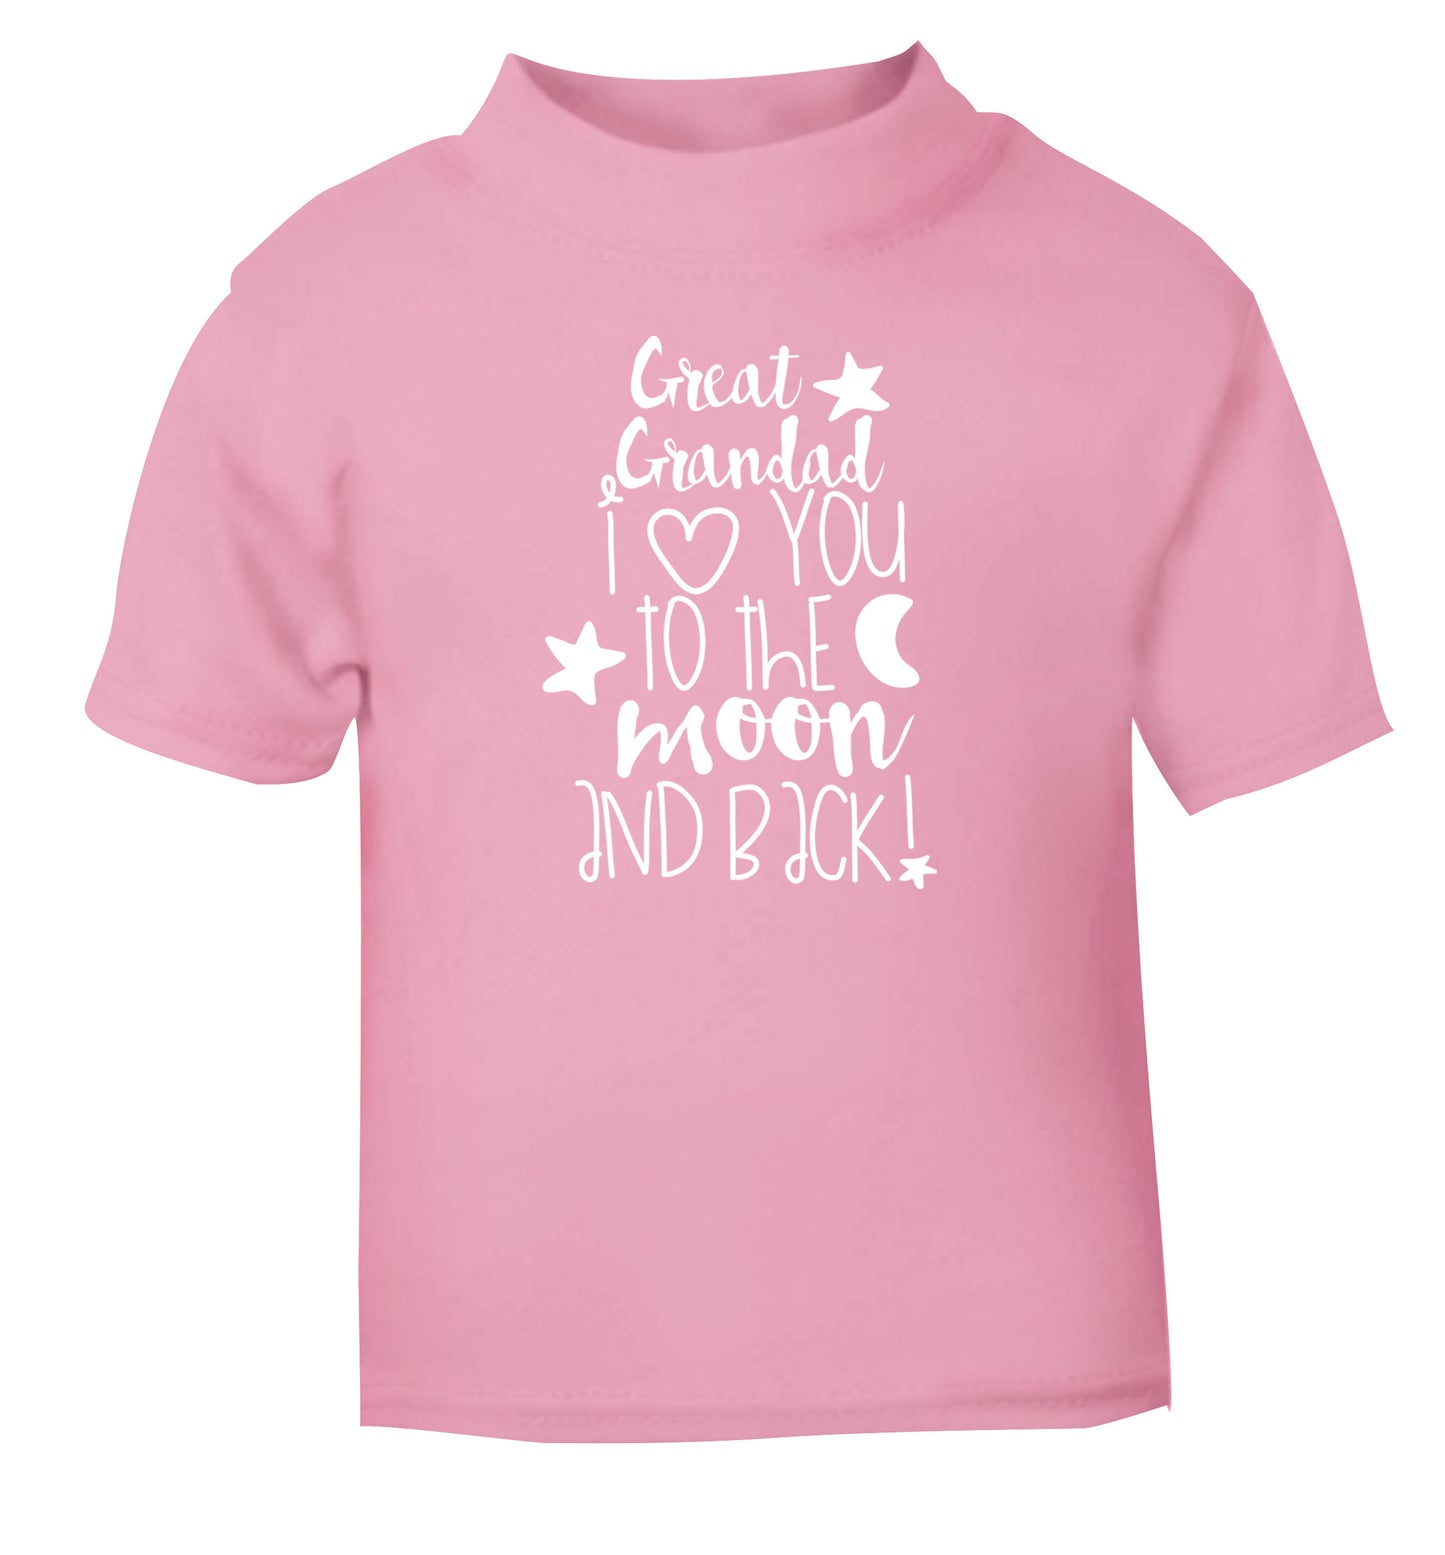 Great Grandad I love you to the moon and back light pink Baby Toddler Tshirt 2 Years